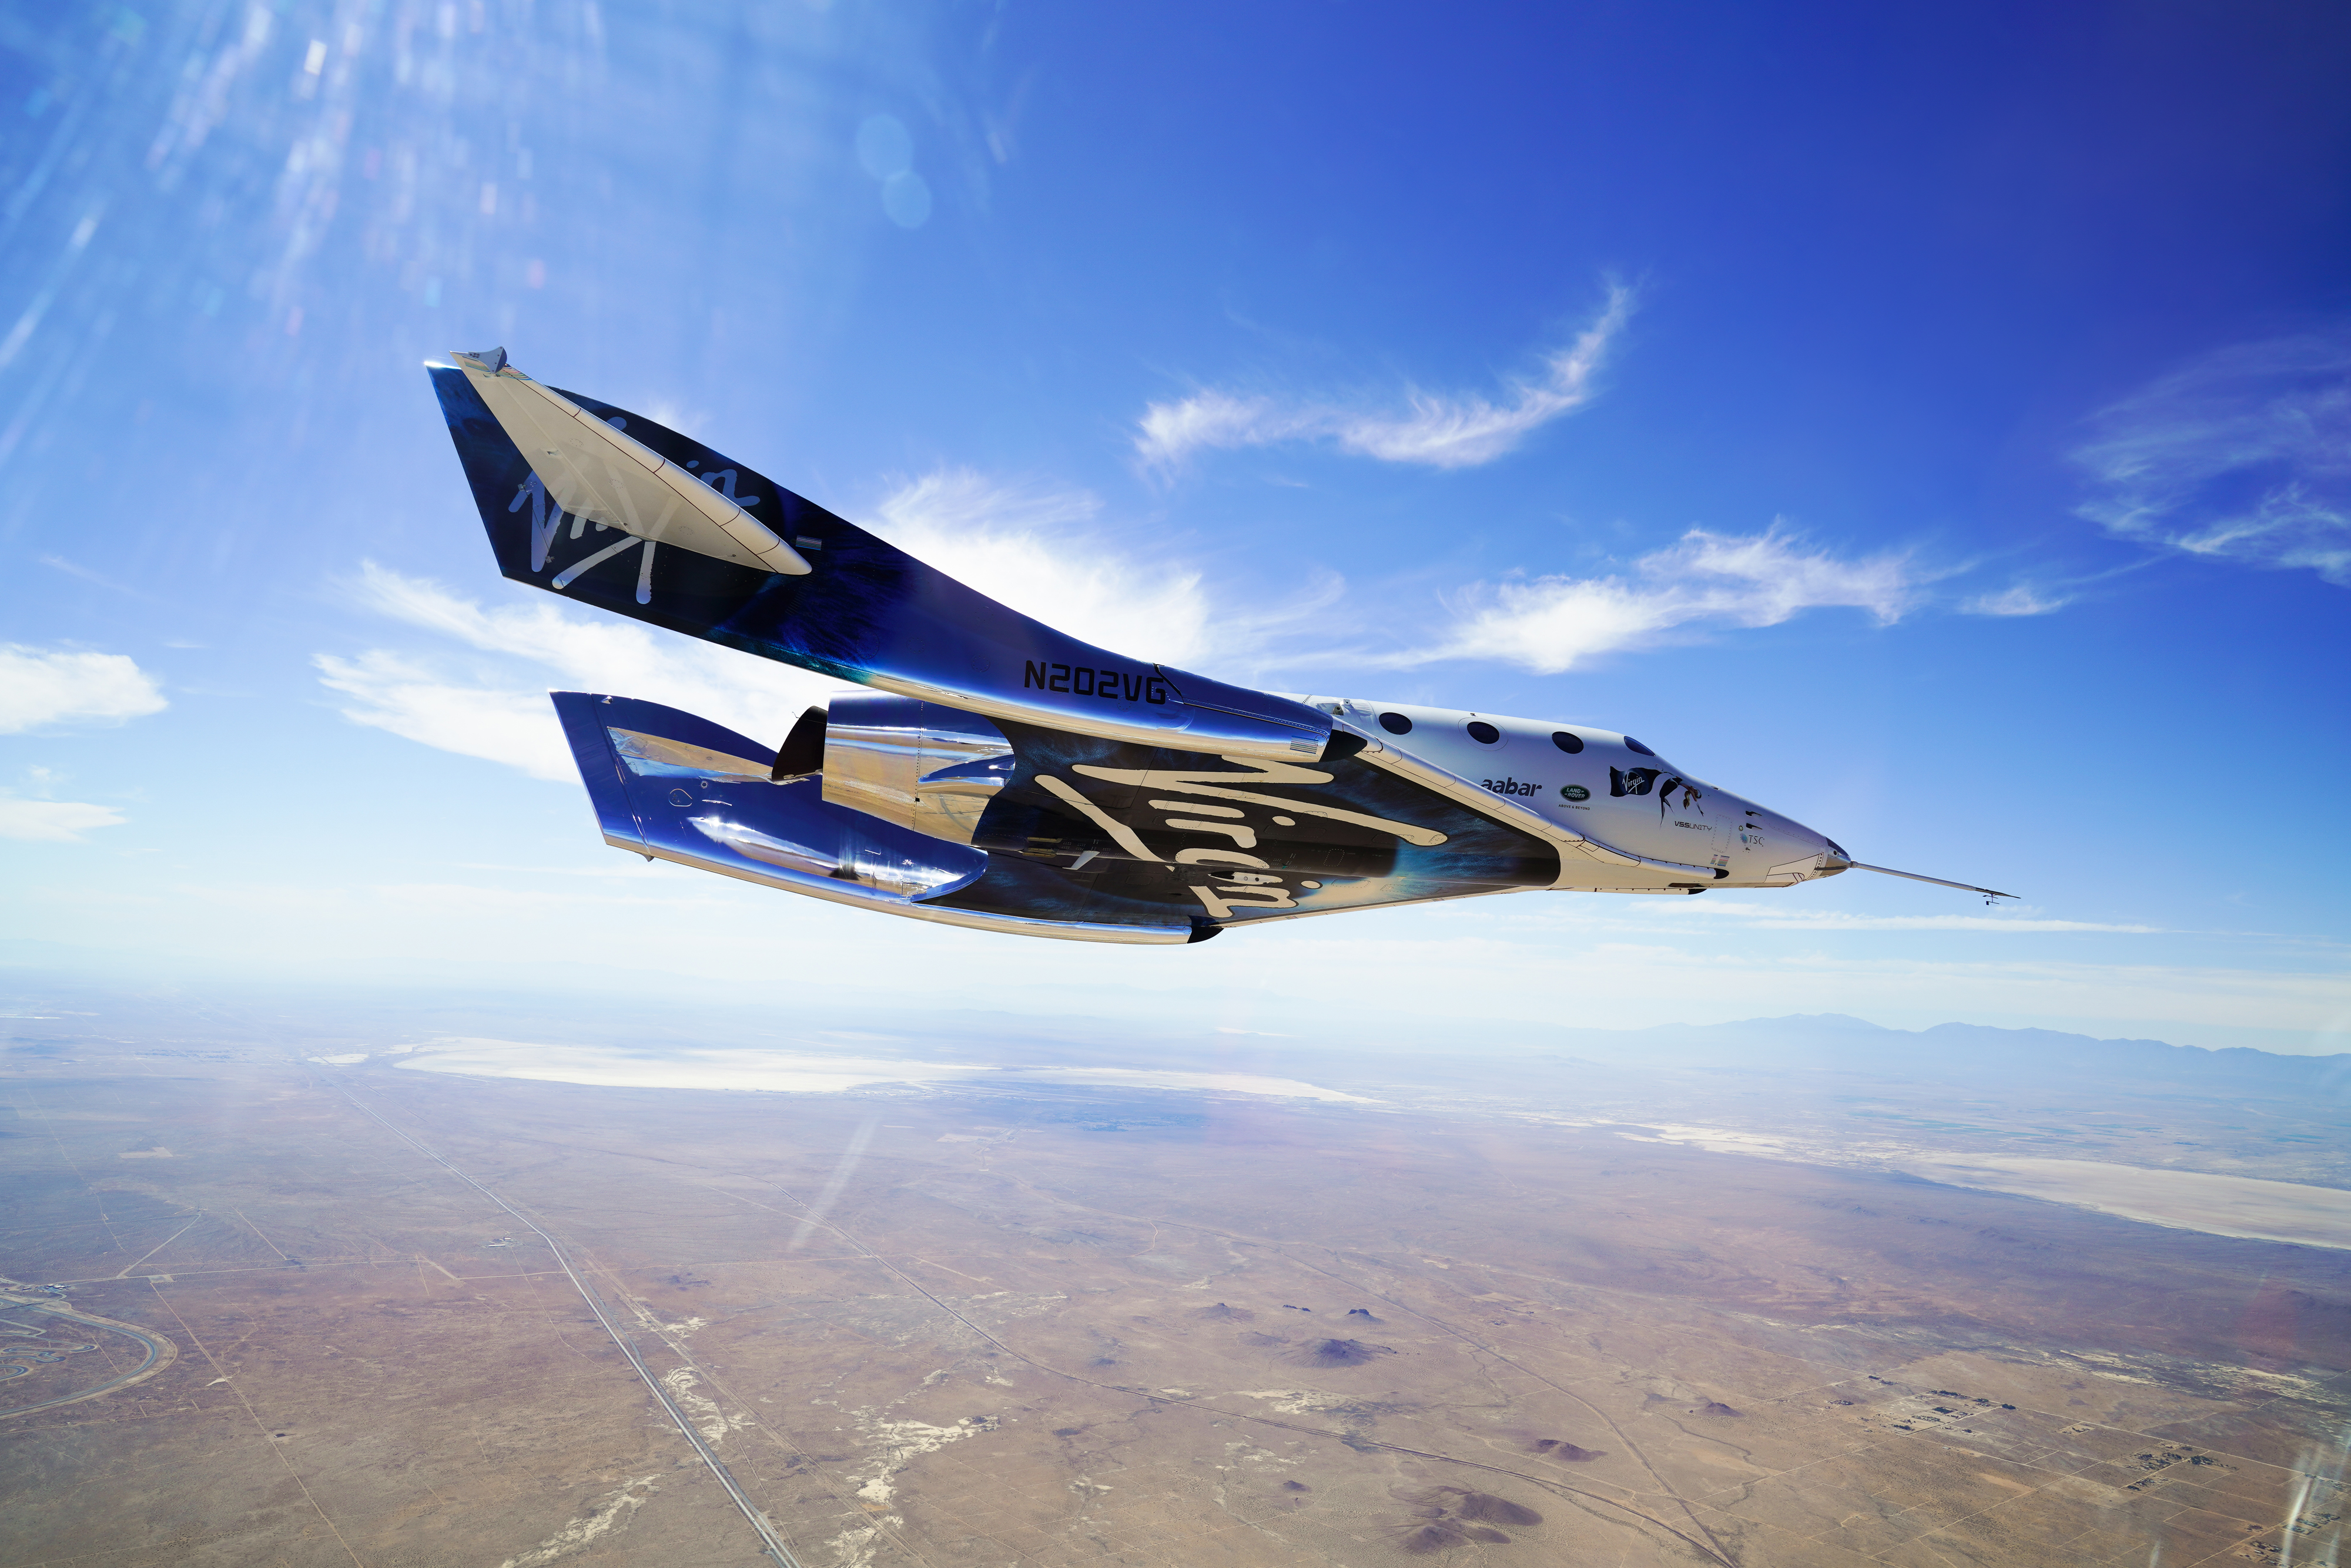 SpaceShipTwo: Virgin Galactic's Vehicle for Space Tourism | Space